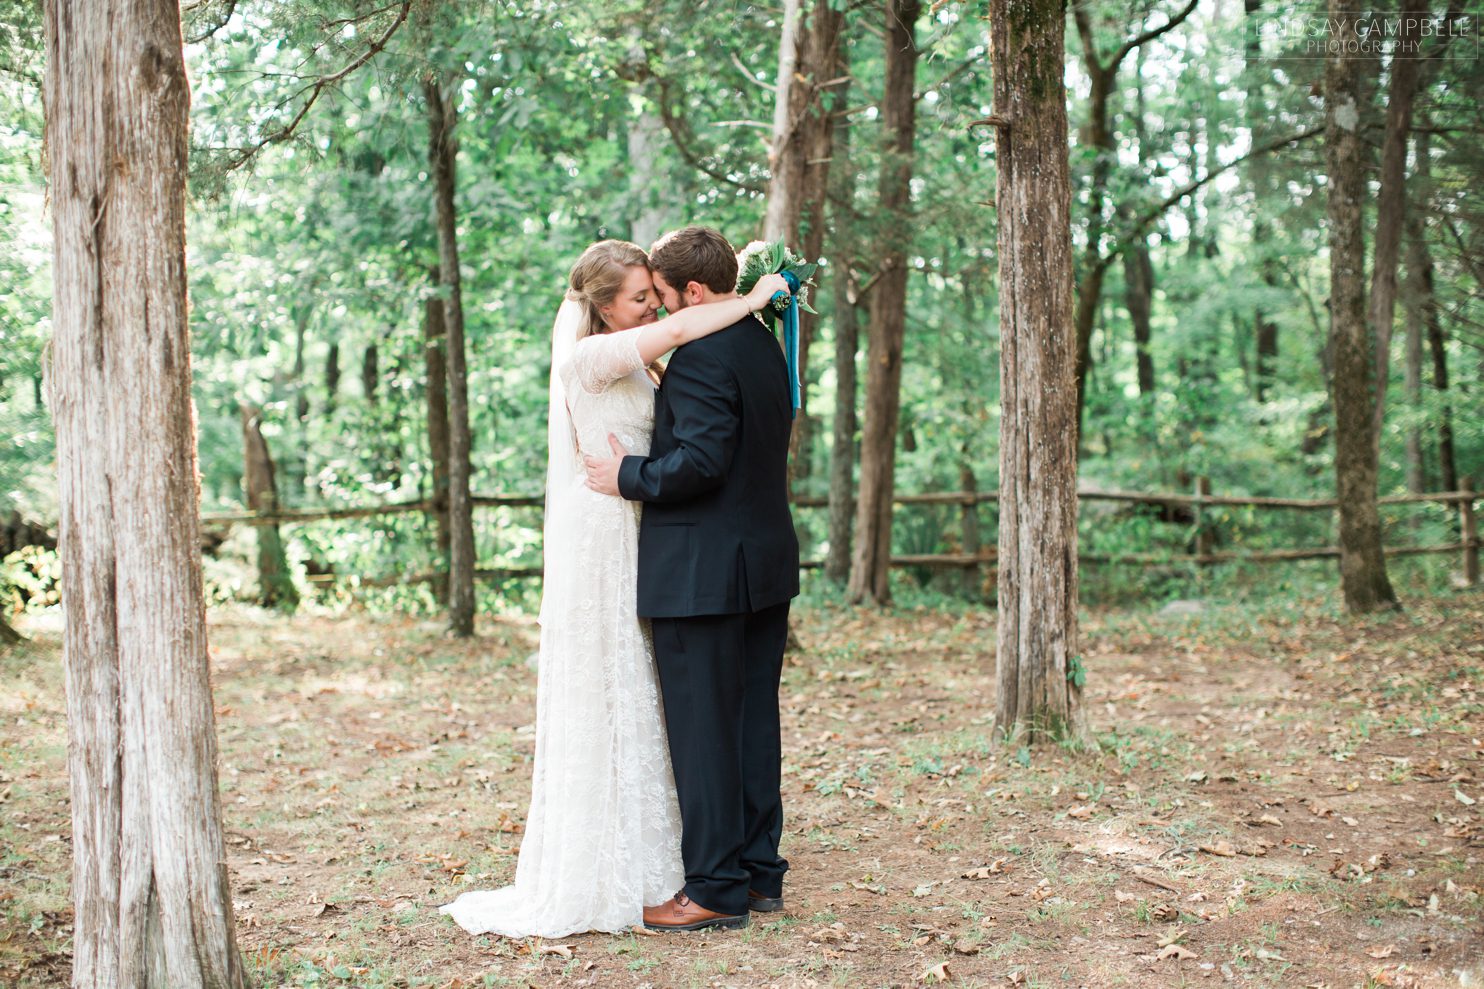 Taylor-and-Andrew-Nashville-Wooded-Wedding-Cedars-of-Lebanon-State-Park-Wedding-Photos_0051 Taylor + Andrew's Geode-Themed Lodge Wedding in the Woods